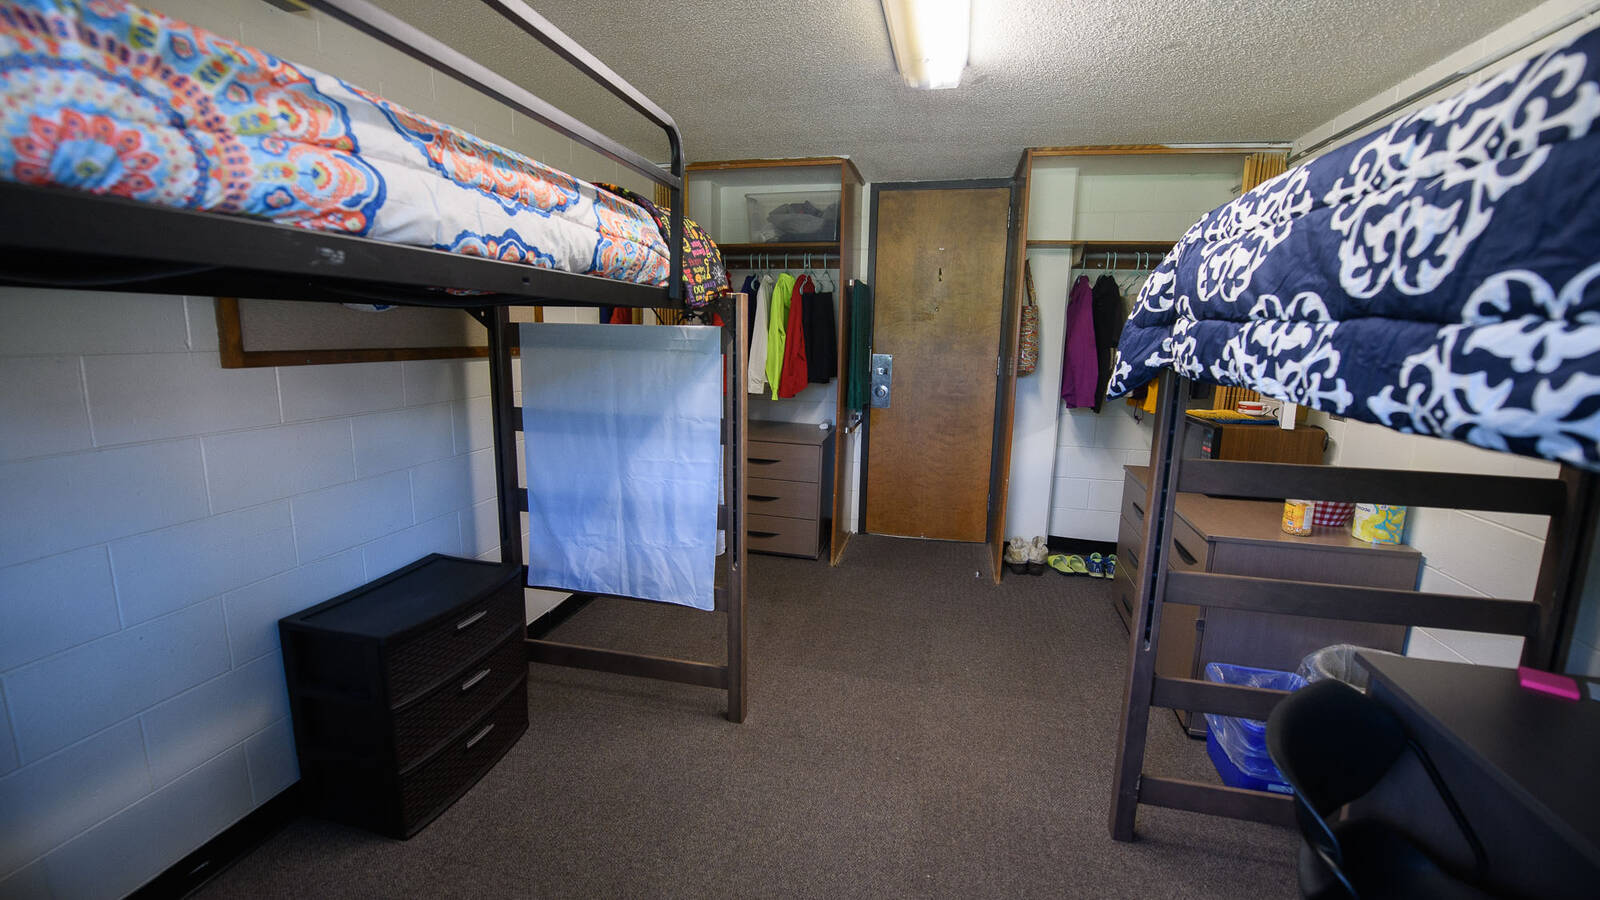 A view of a dorm living space facing the entrance, where both closets and dressers can be seen in a lofted arrangement